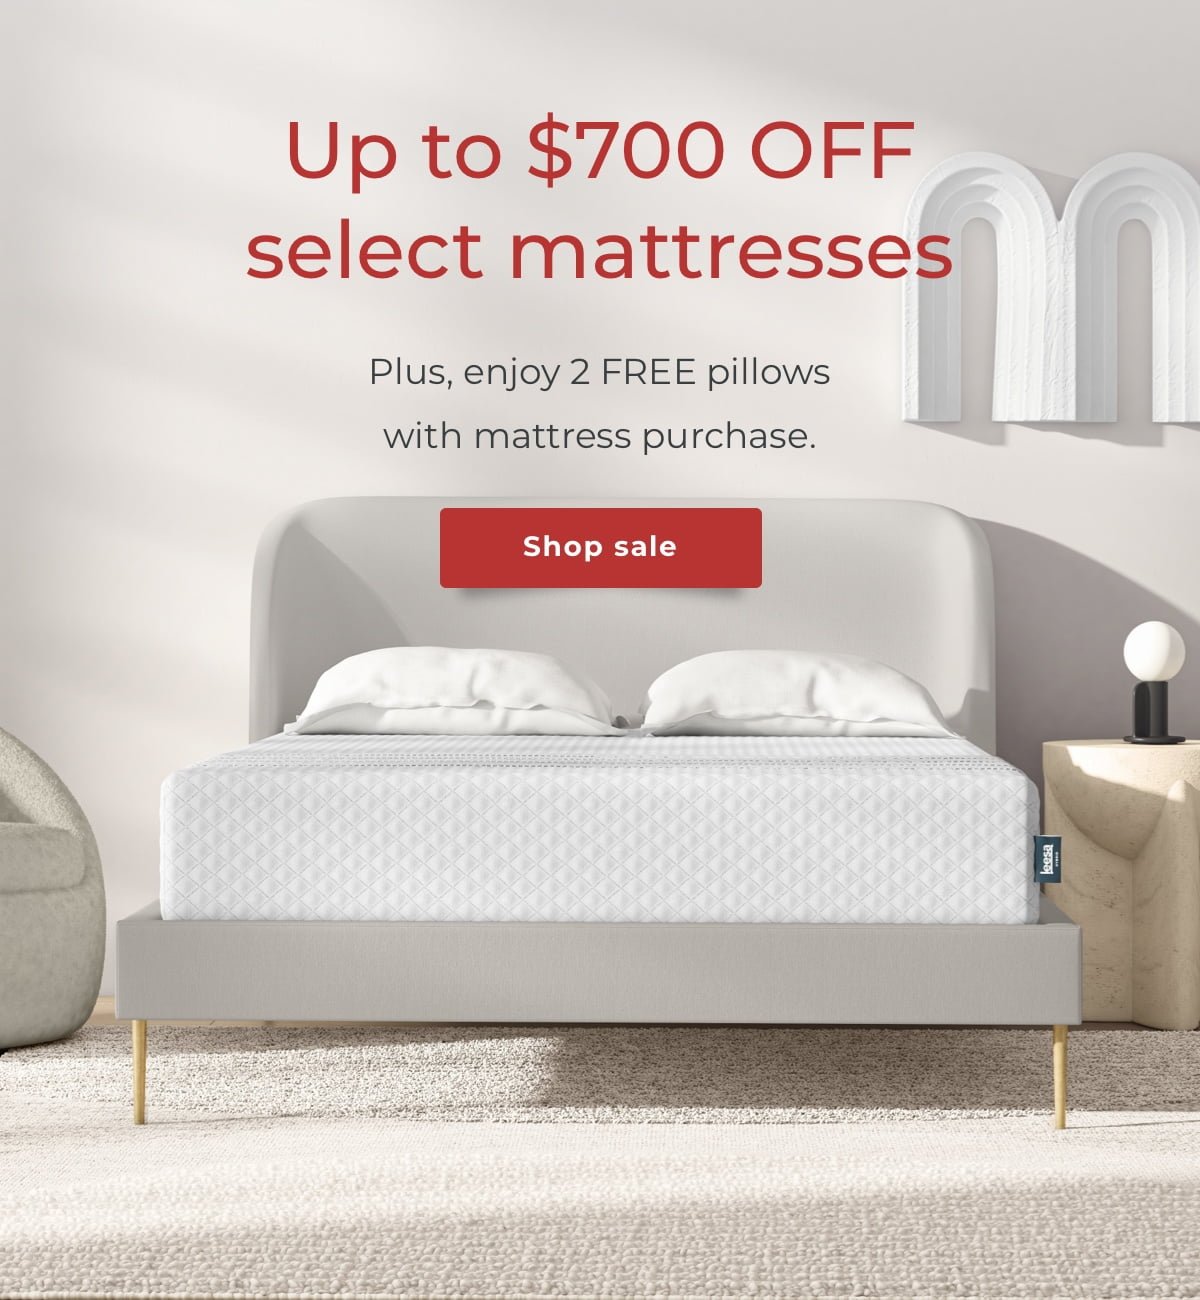 Up to $700 off select mattresses